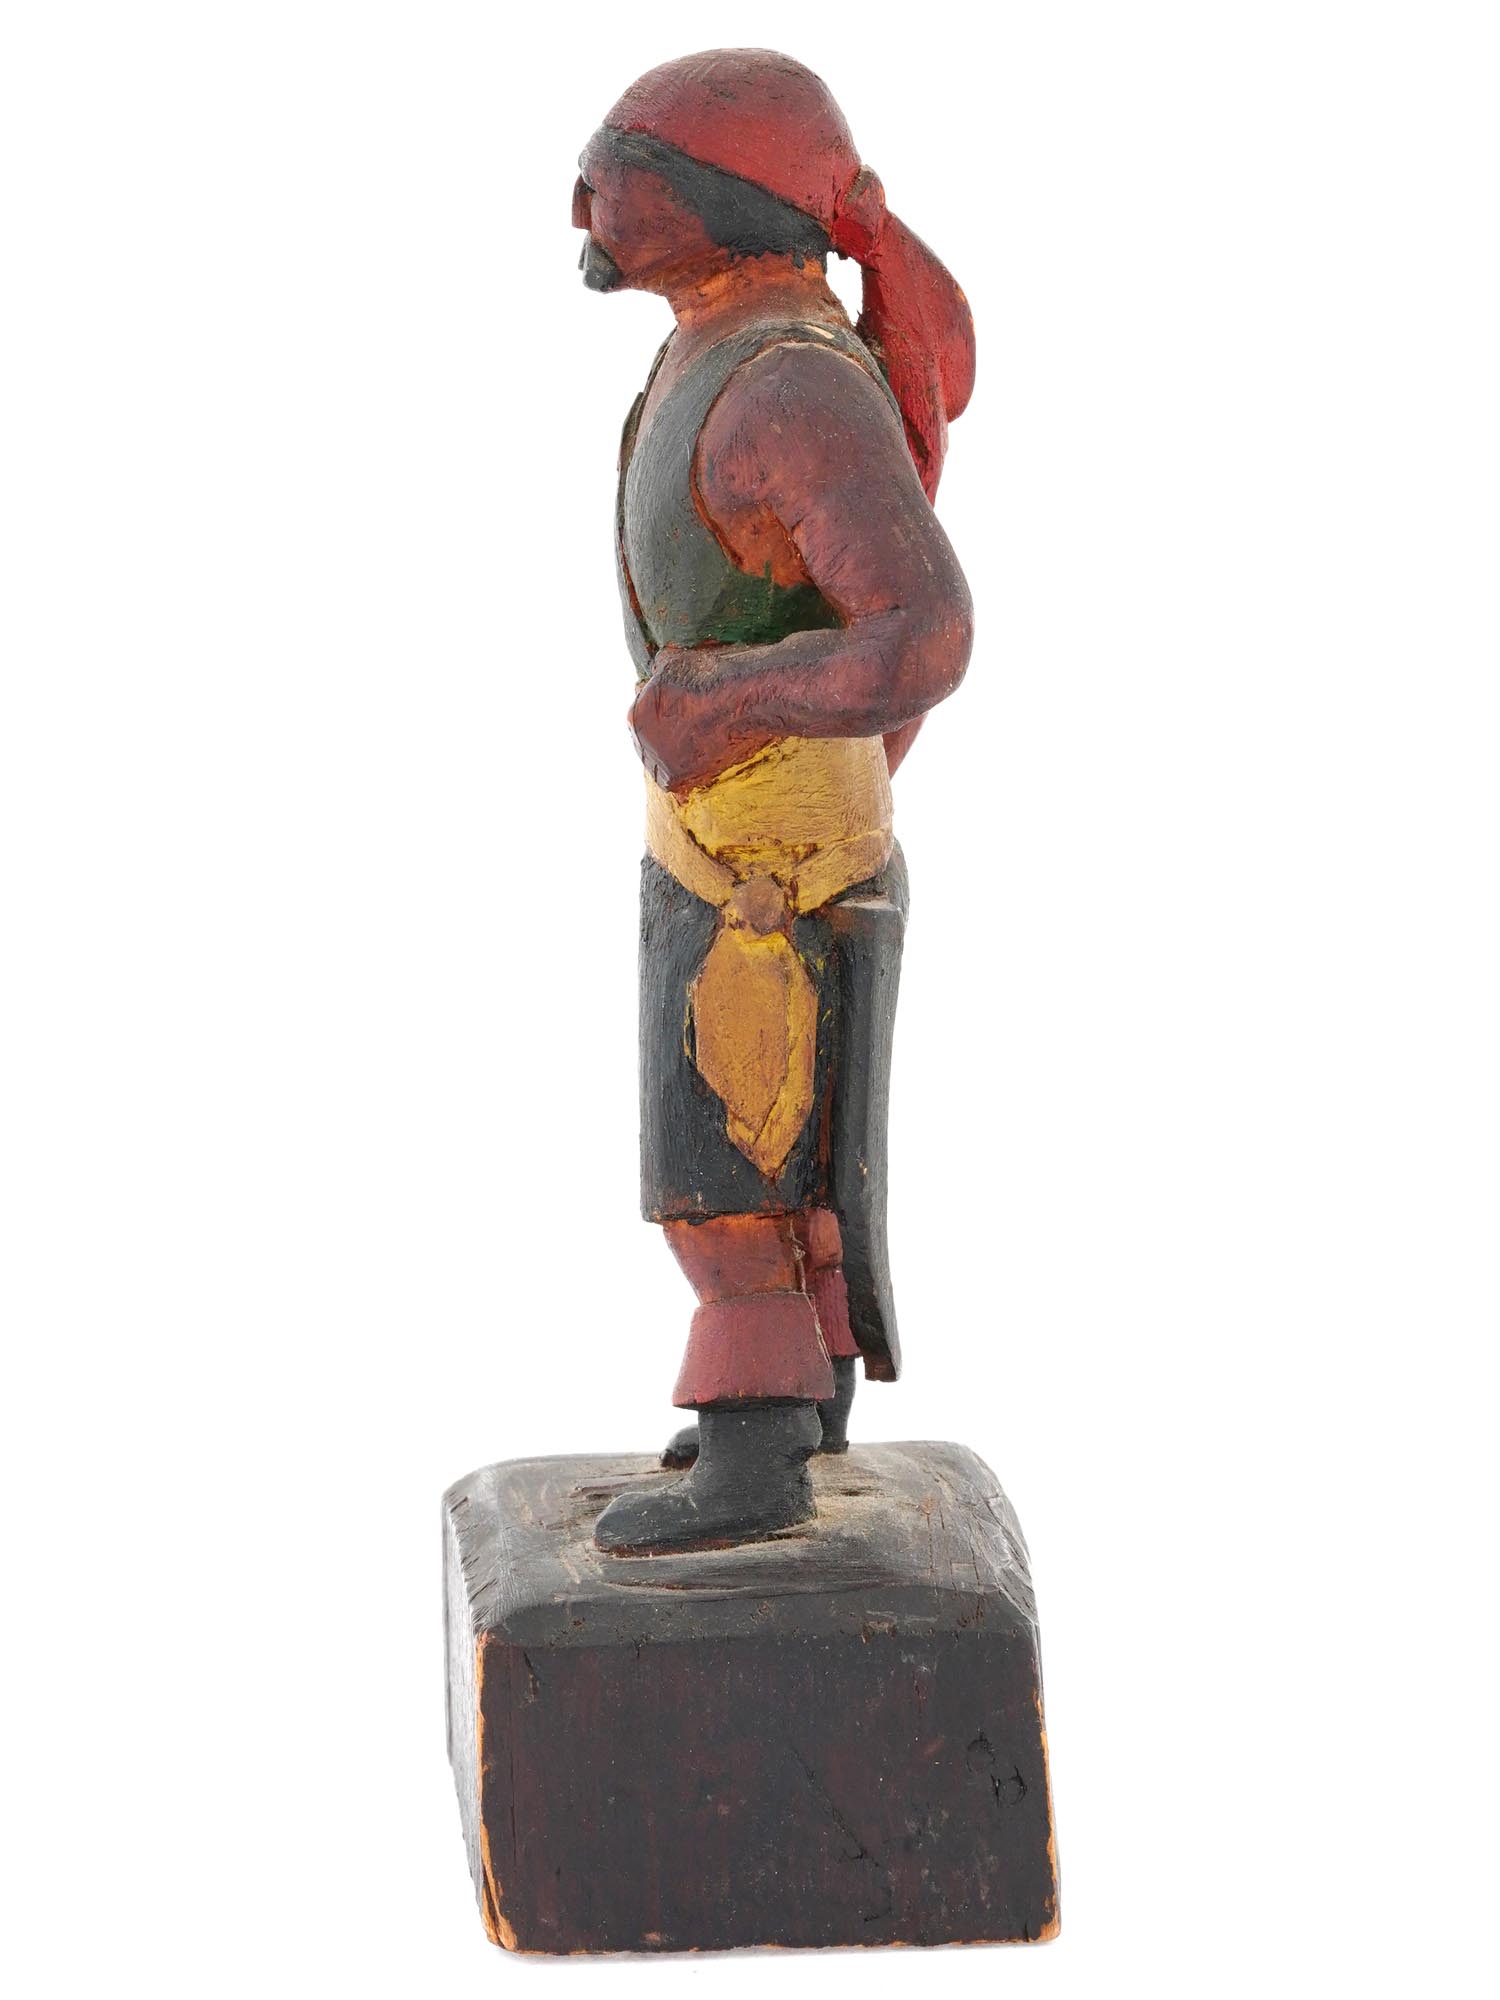 AMERICAN FOLK ART HAND CARVED WOOD FIGURE OF PIRATE PIC-5